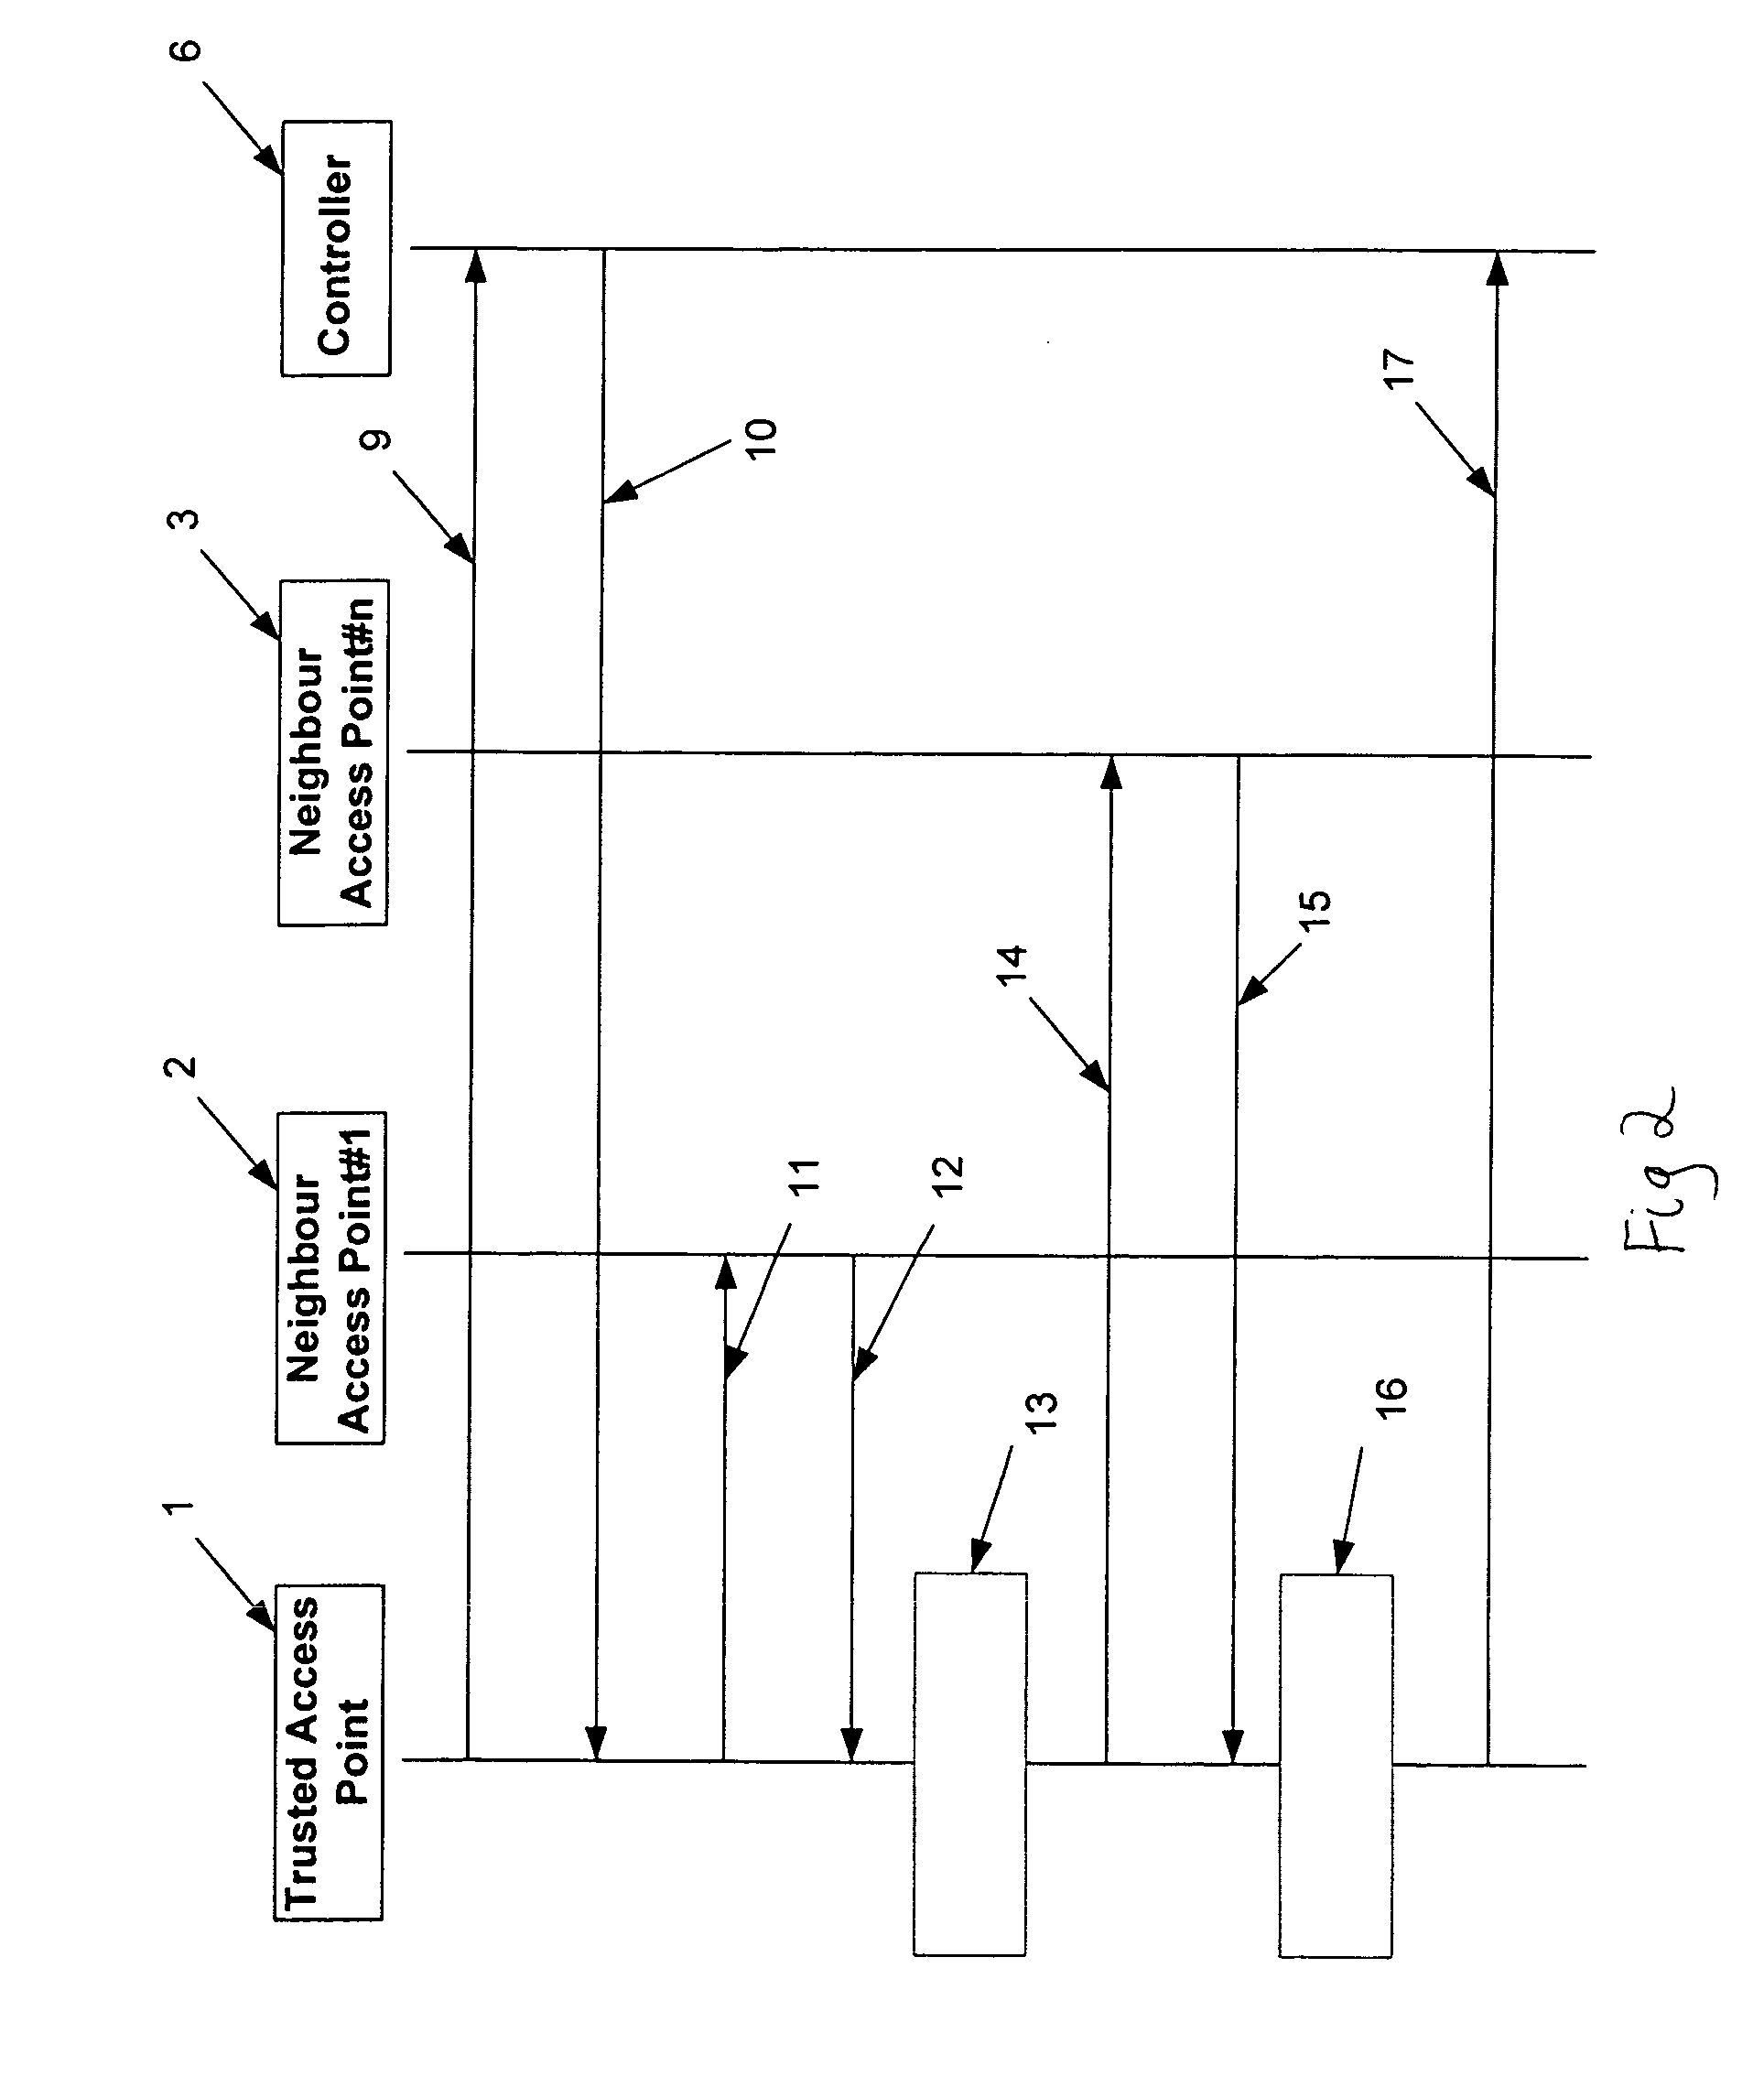 Method of authenticating access points on a wireless network